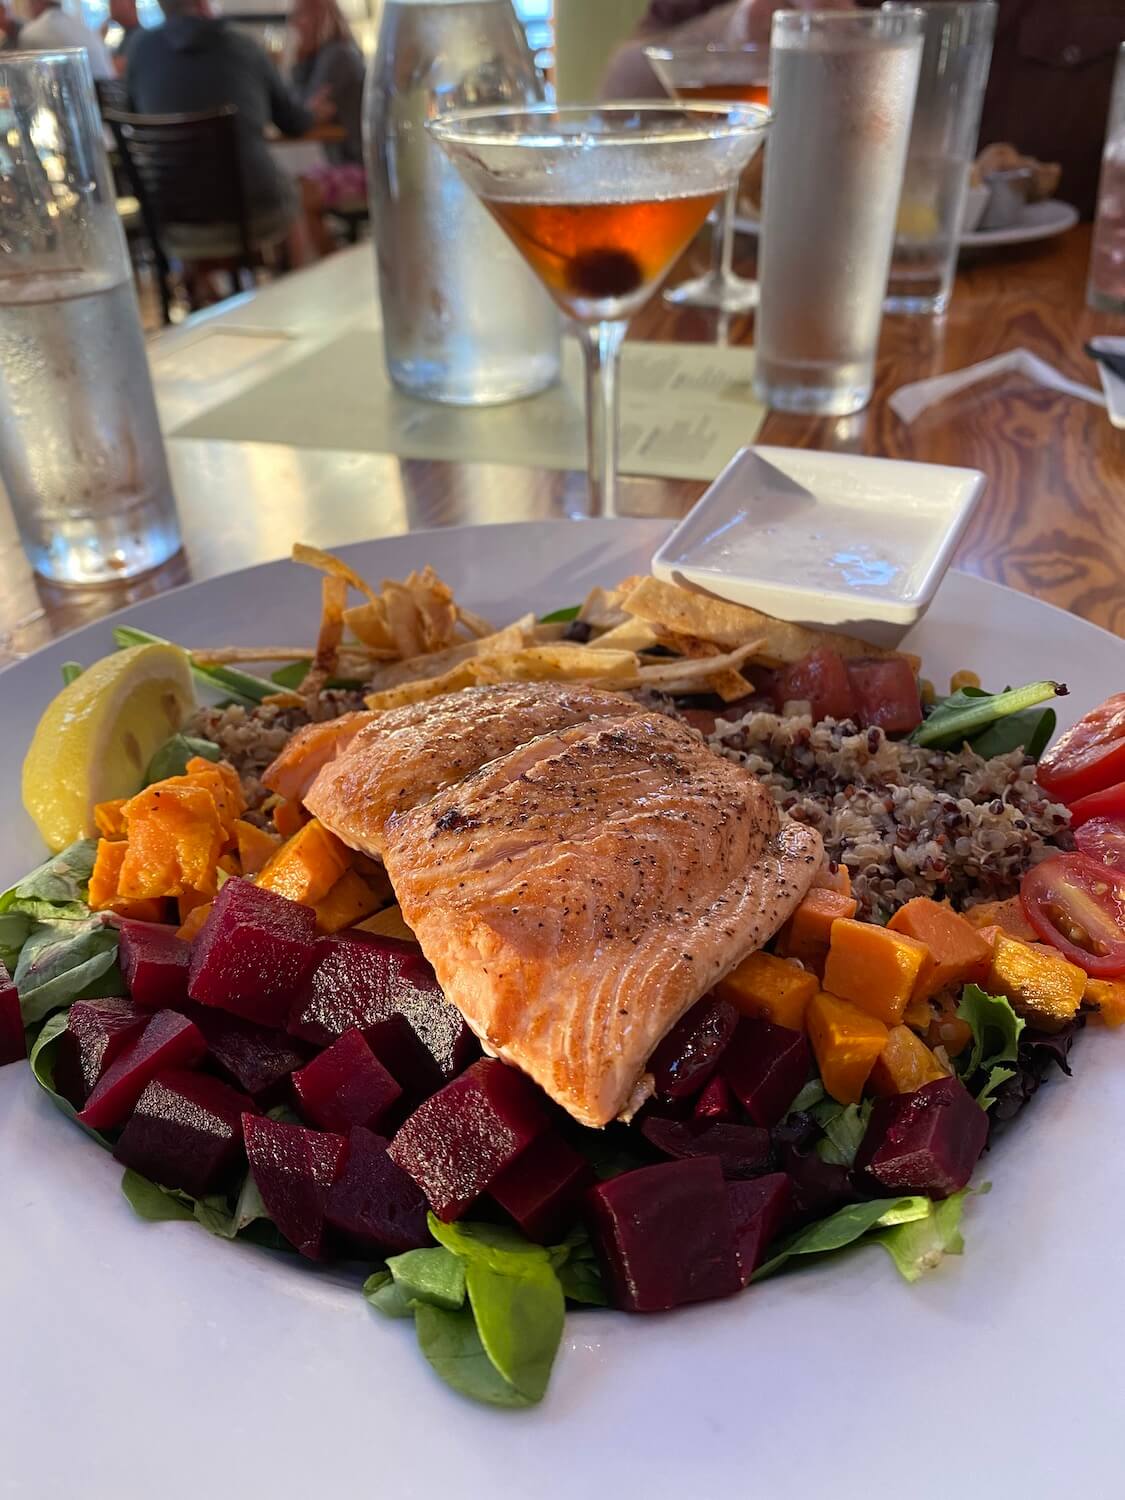 Eating seafood is a great thing to do in Astoria, Oregon and this meal features a delicious filet of pink salmon over a bed of beets and other delicious food. 